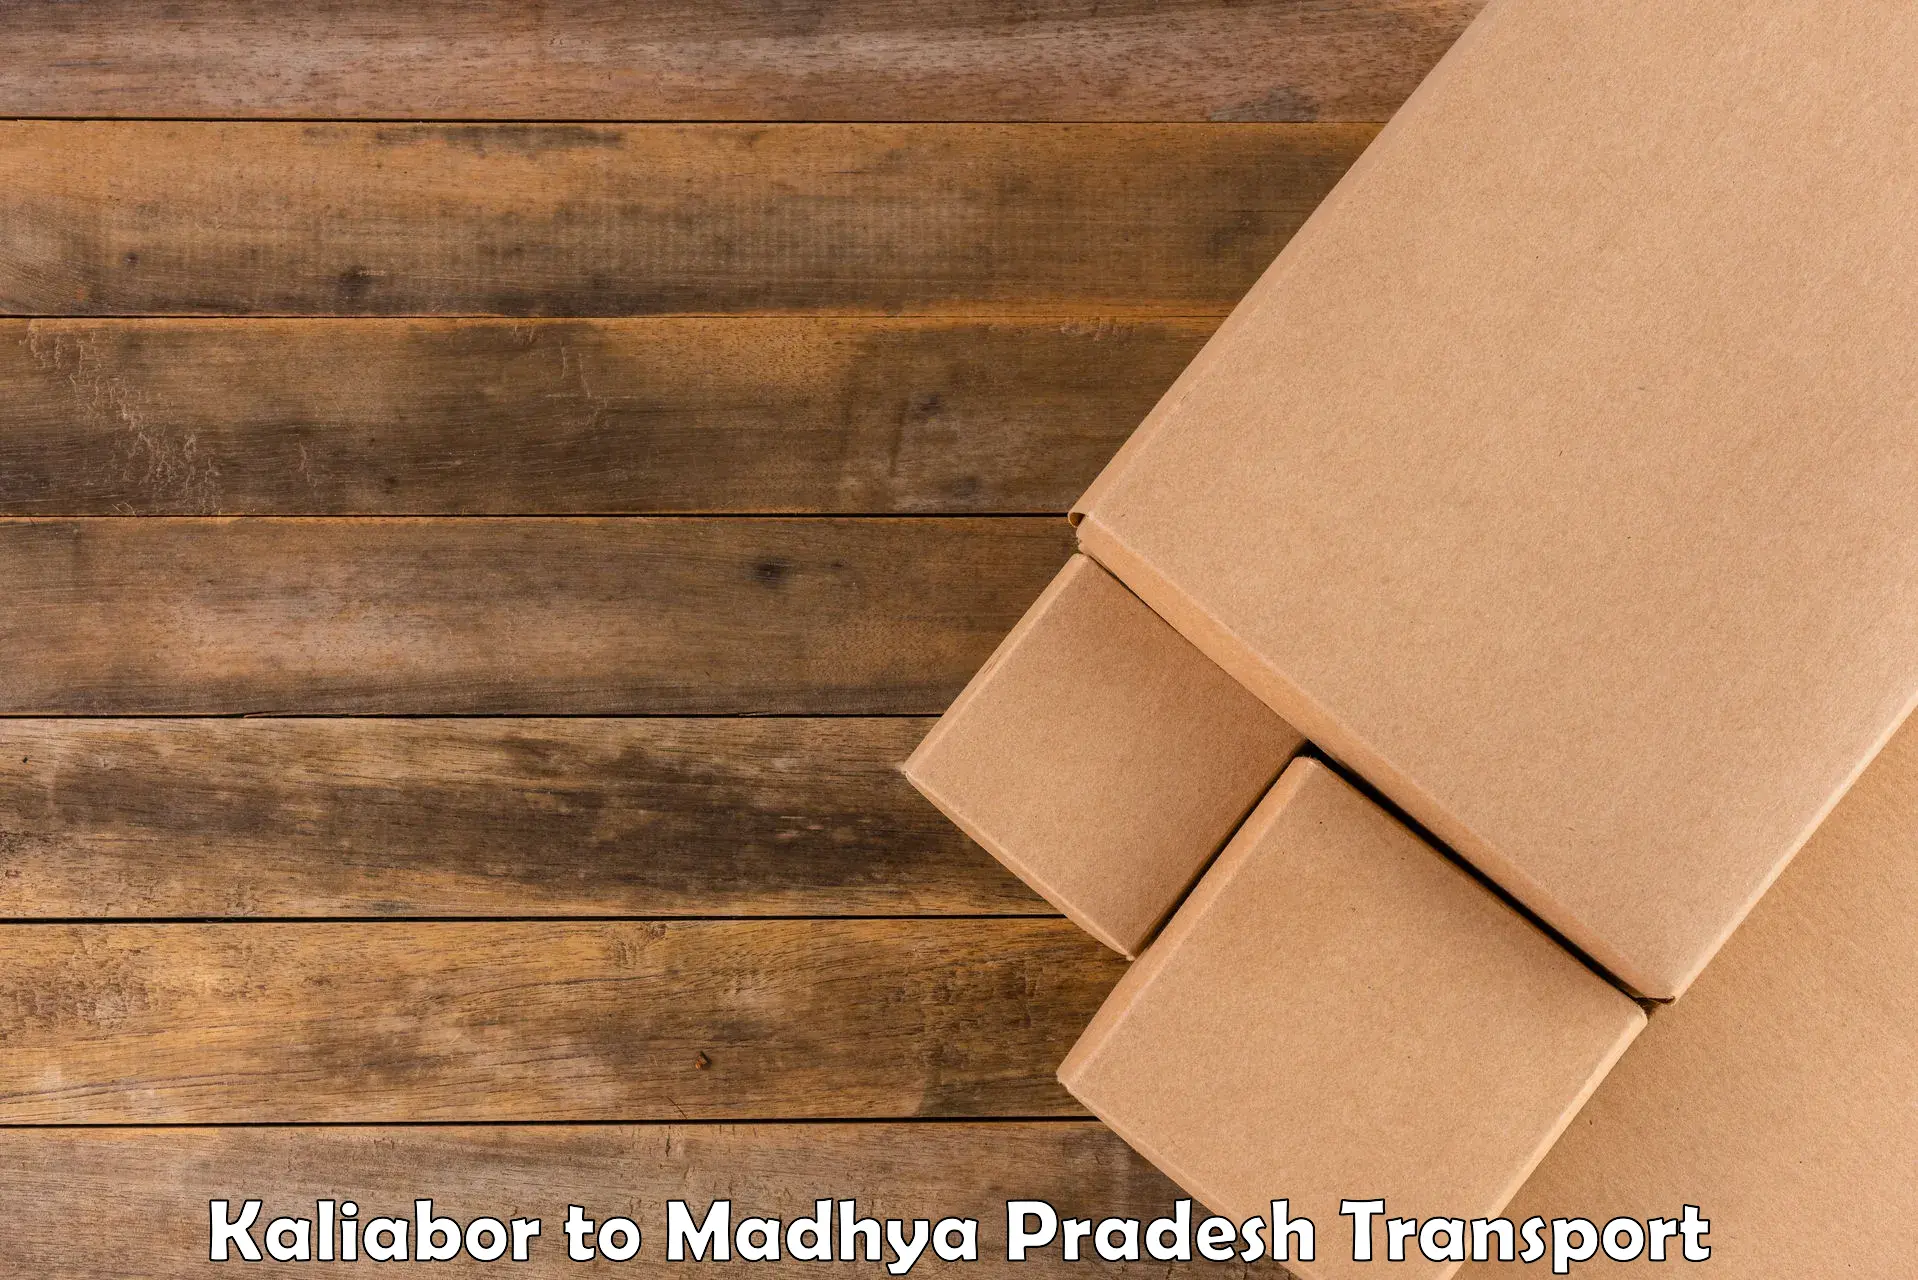 Package delivery services Kaliabor to Indore